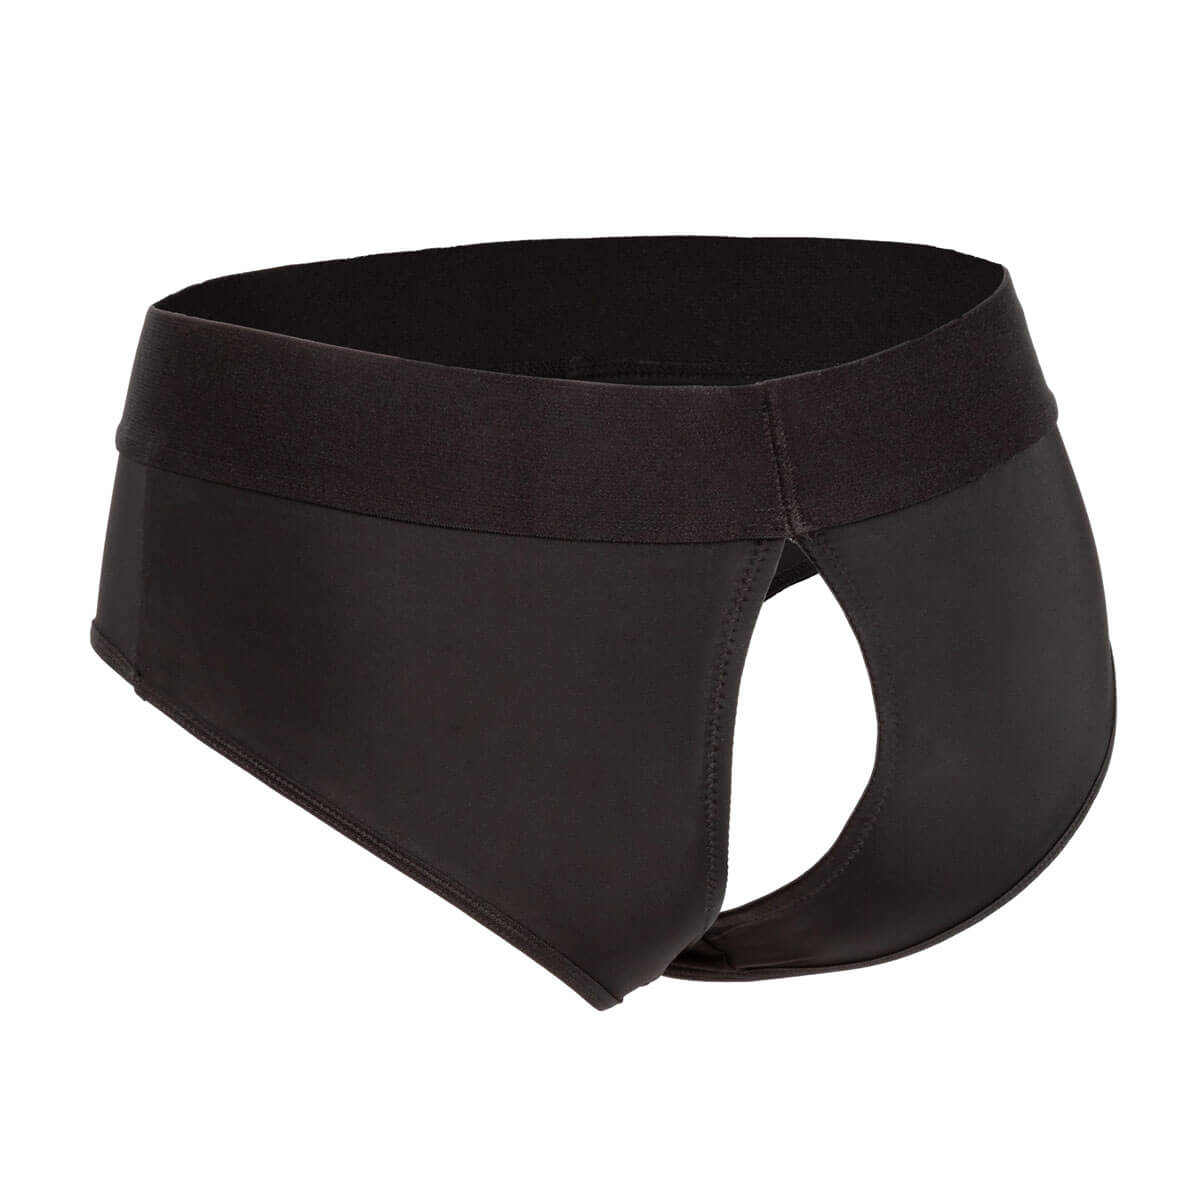 Backless black cotton briefs to use as a harness Nudie Co